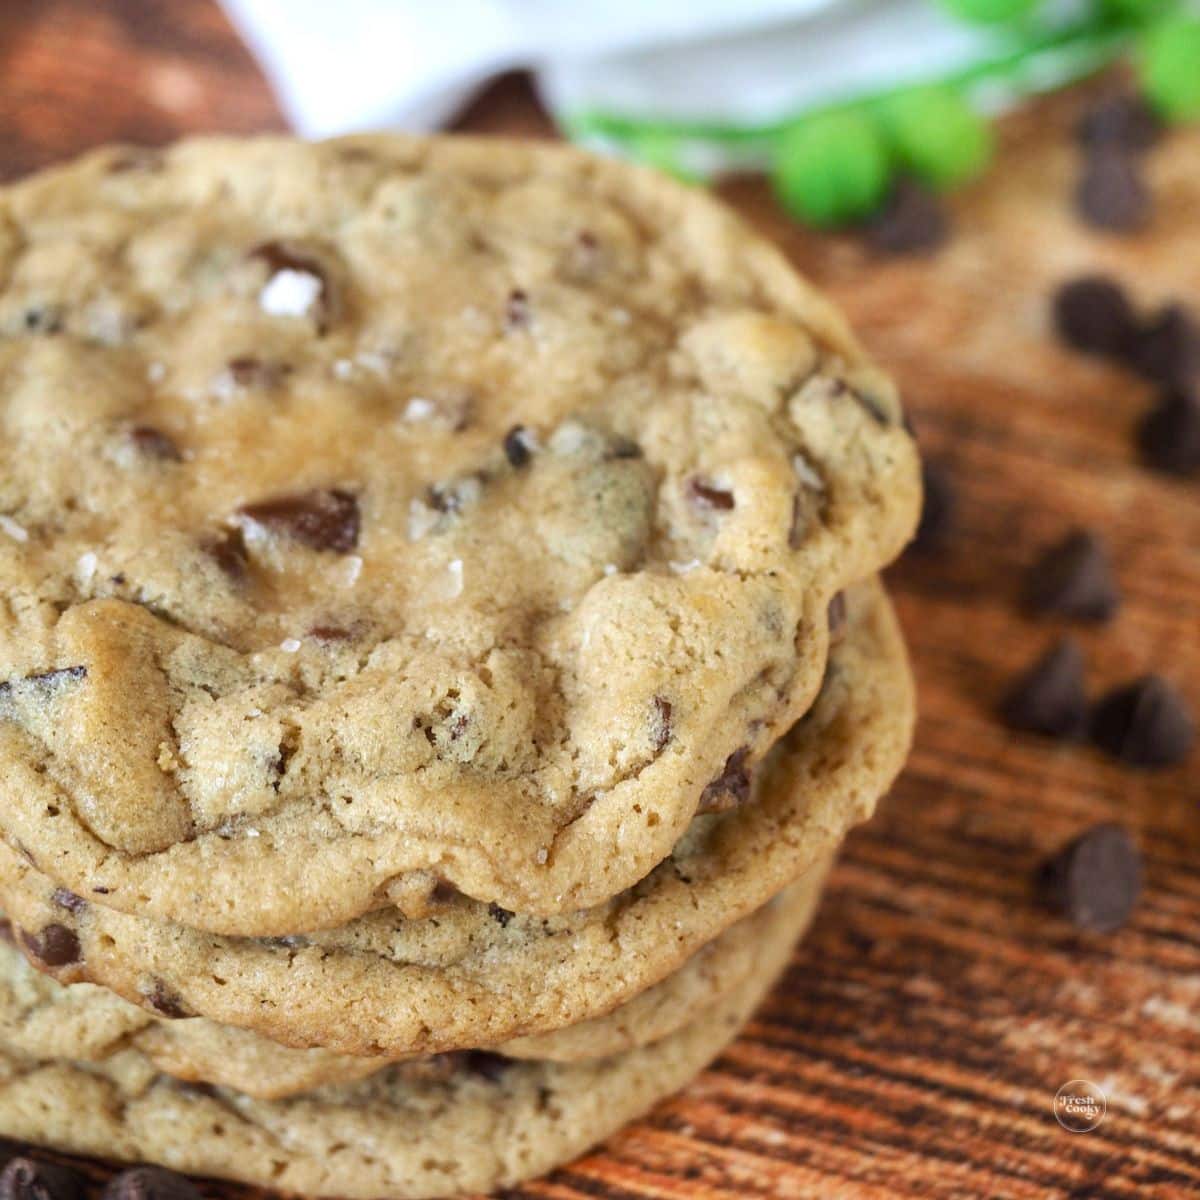 The Best Chewy Chocolate Chip Cookies Recipe by Tasty